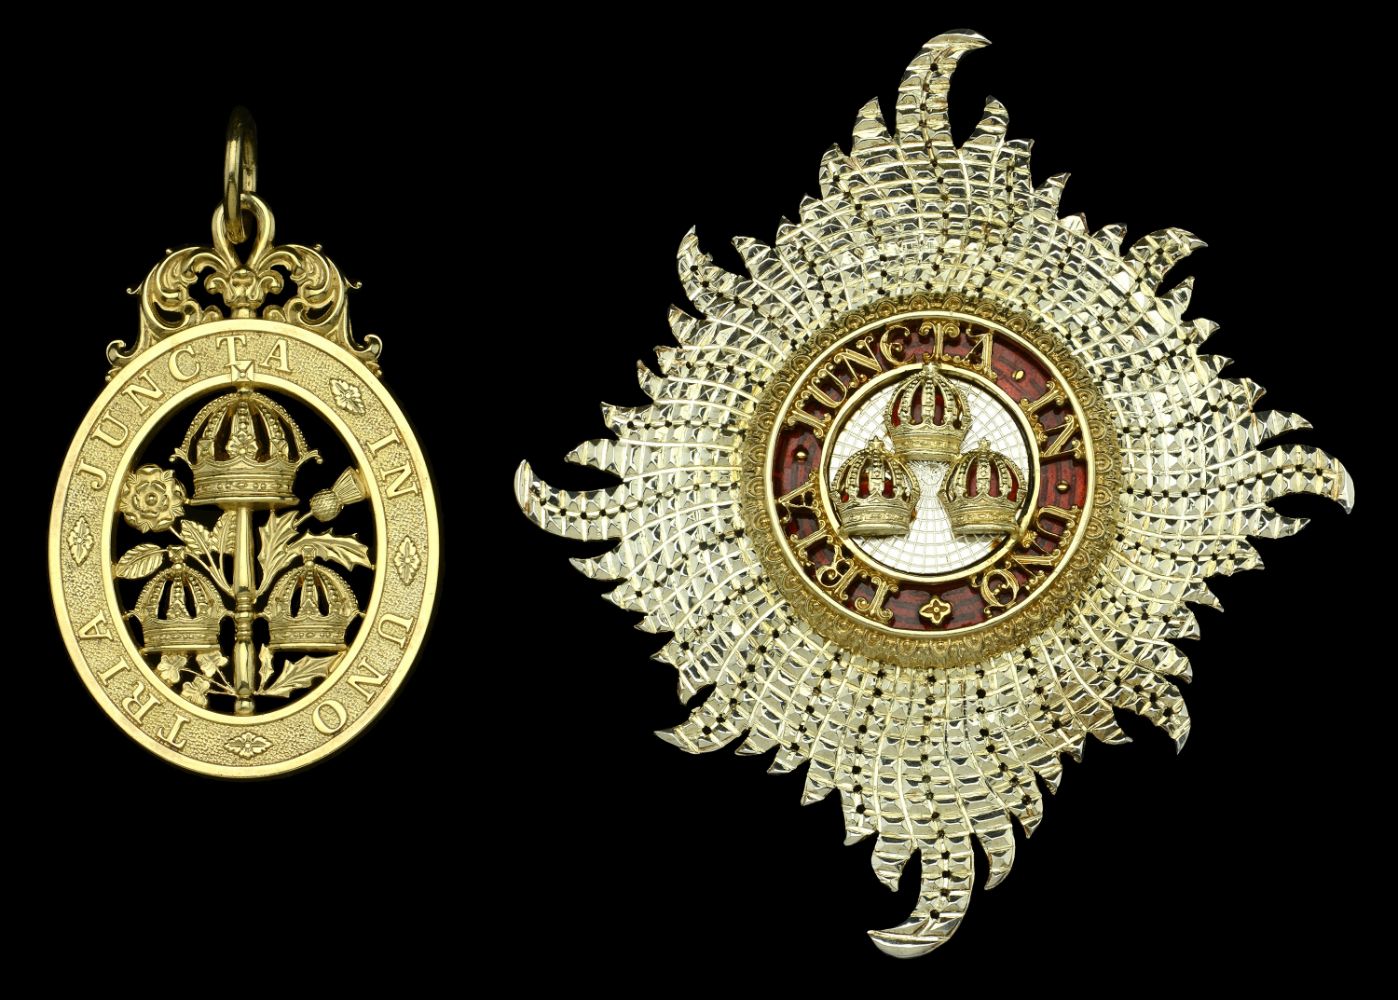 Orders, Decorations, Medals and Militaria